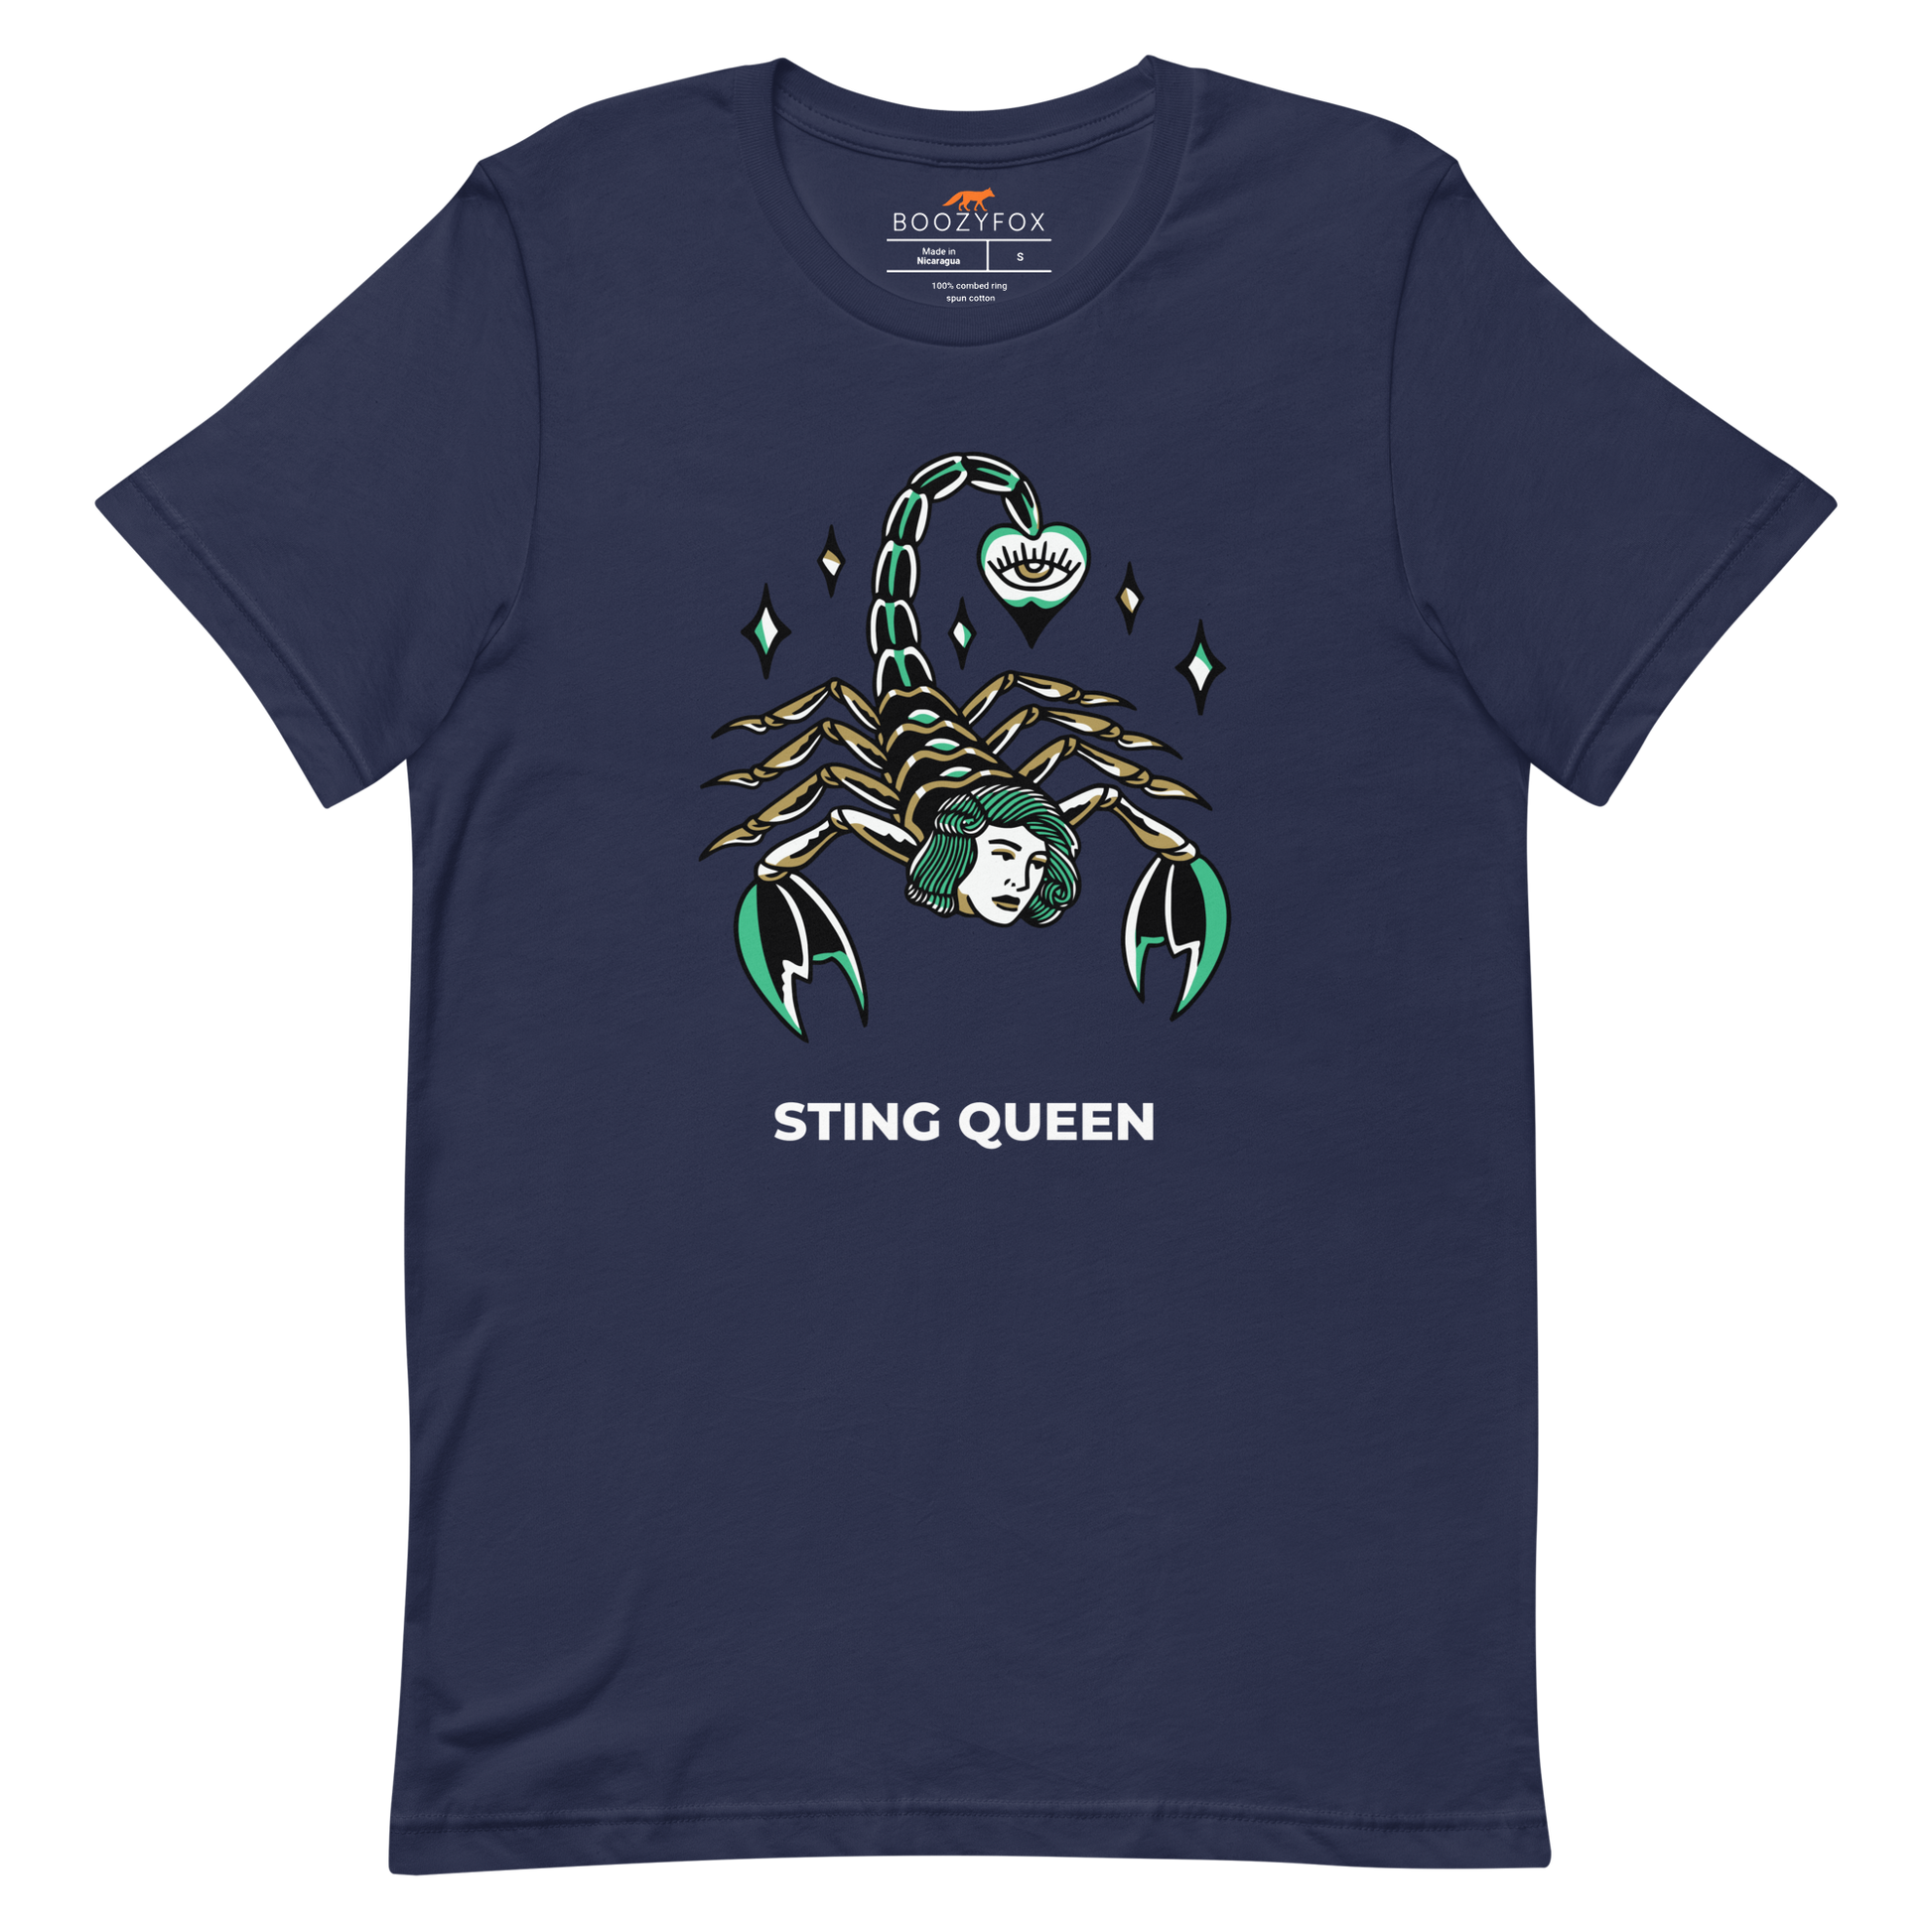 Navy Premium Scorpion Tee featuring The Sting Queen graphic on the chest - Cool Graphic Scorpion Tees - Boozy Fox